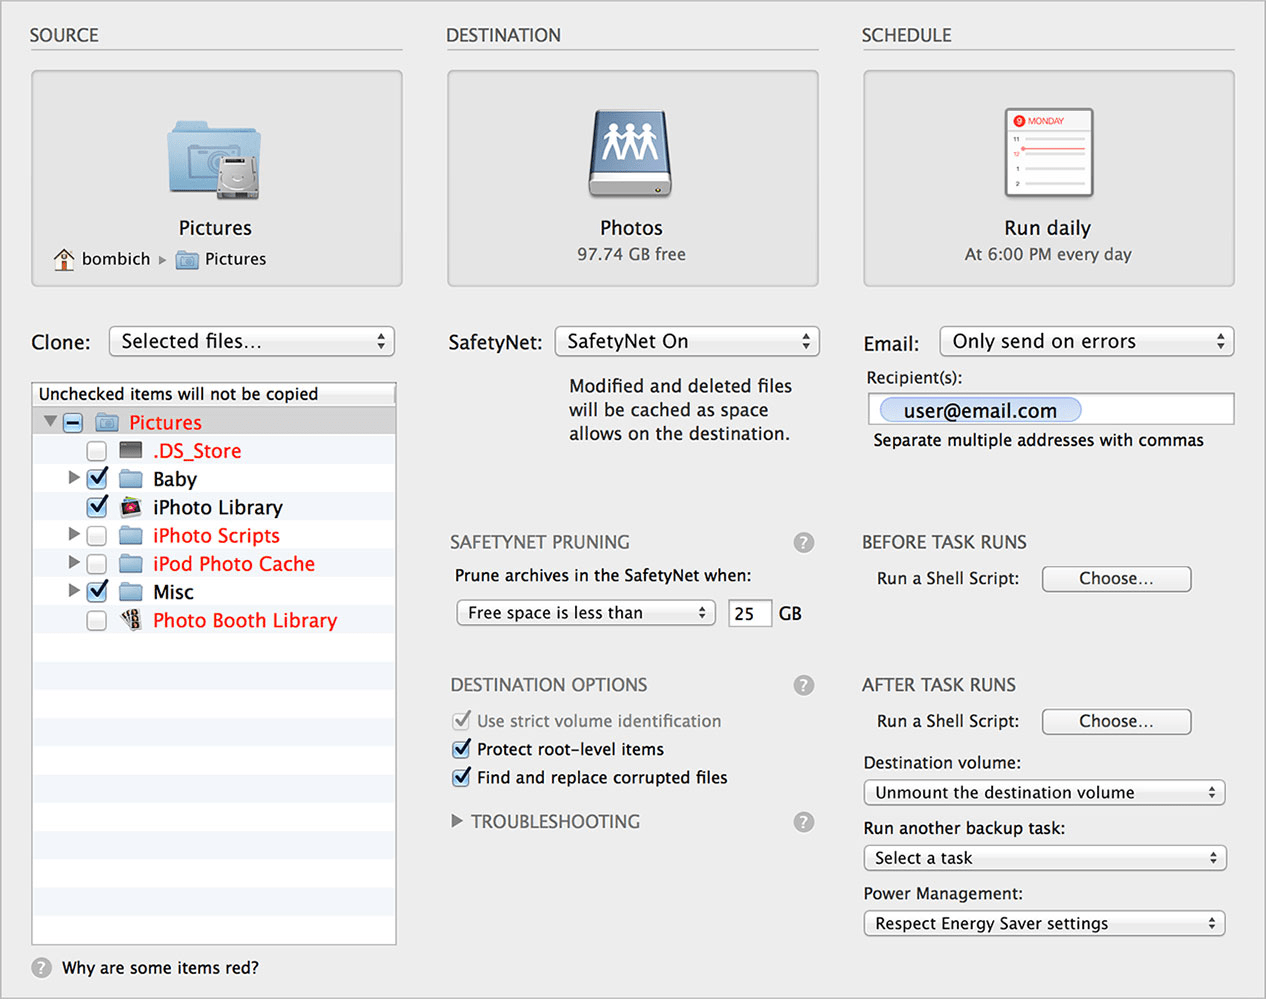 pc back up software similar to carbon copy cloner for mac